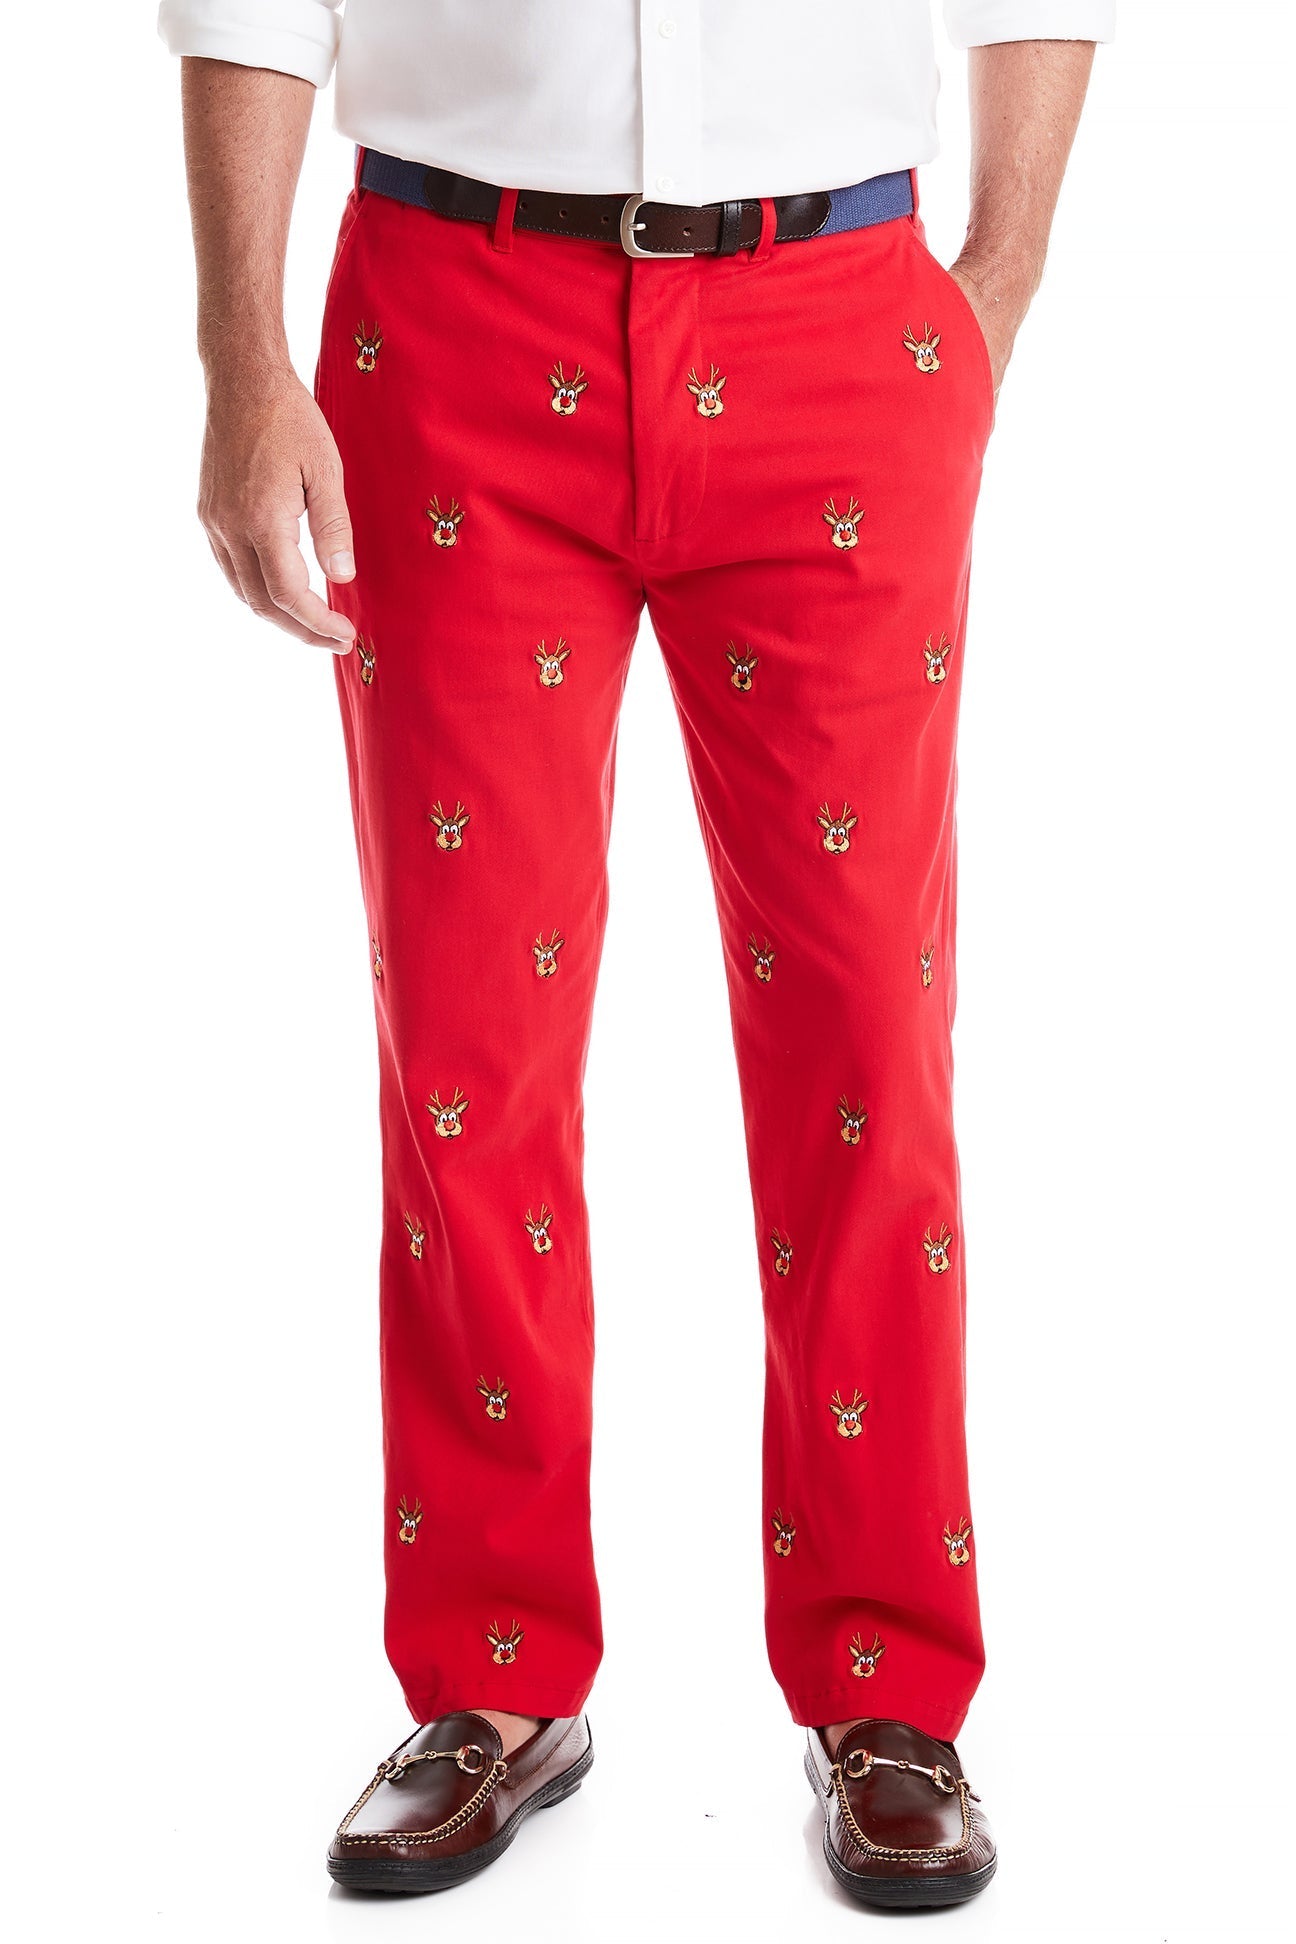 Harbor Pant Stretch Twill Bright Red with Rudolph MENS EMBROIDERED PANTS Castaway Nantucket Island